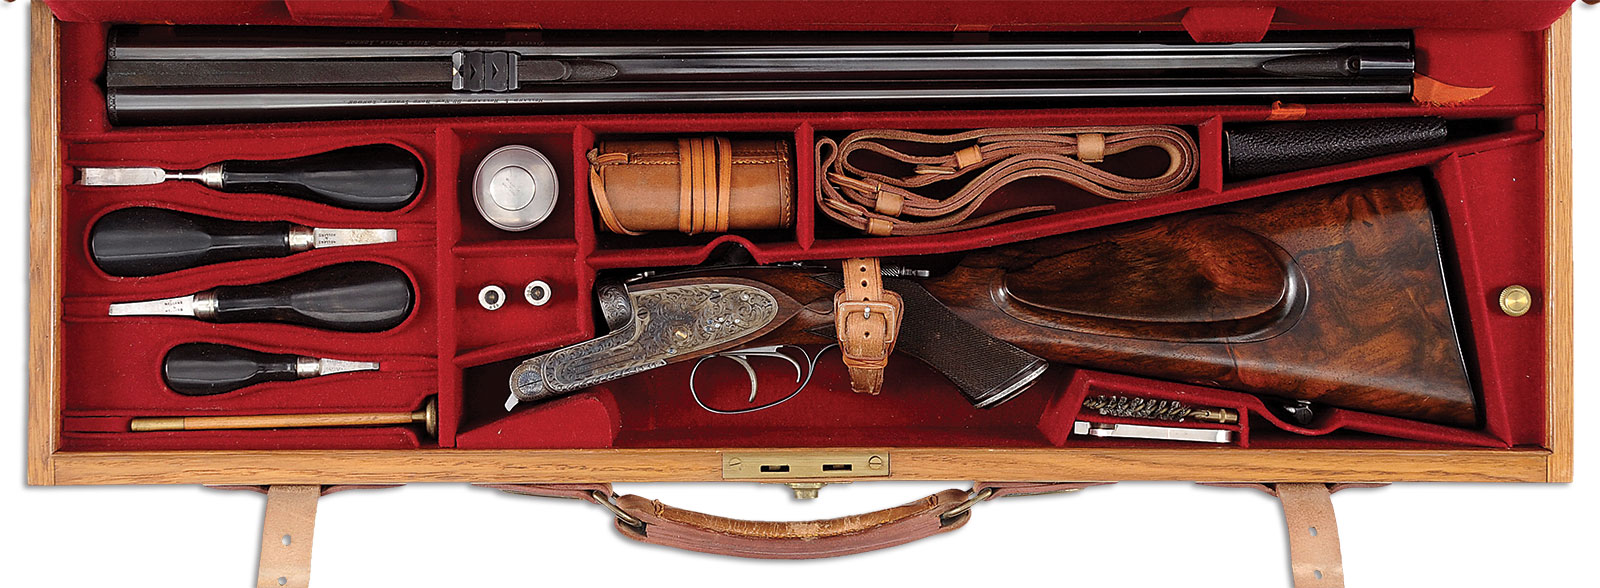 Pristine Holland & Holland Royal Ejector .375NE Double Rifle in Maker’s Case w/Acc. Made for Nathaniel C. Nash, Cambridge, Mass in 1900